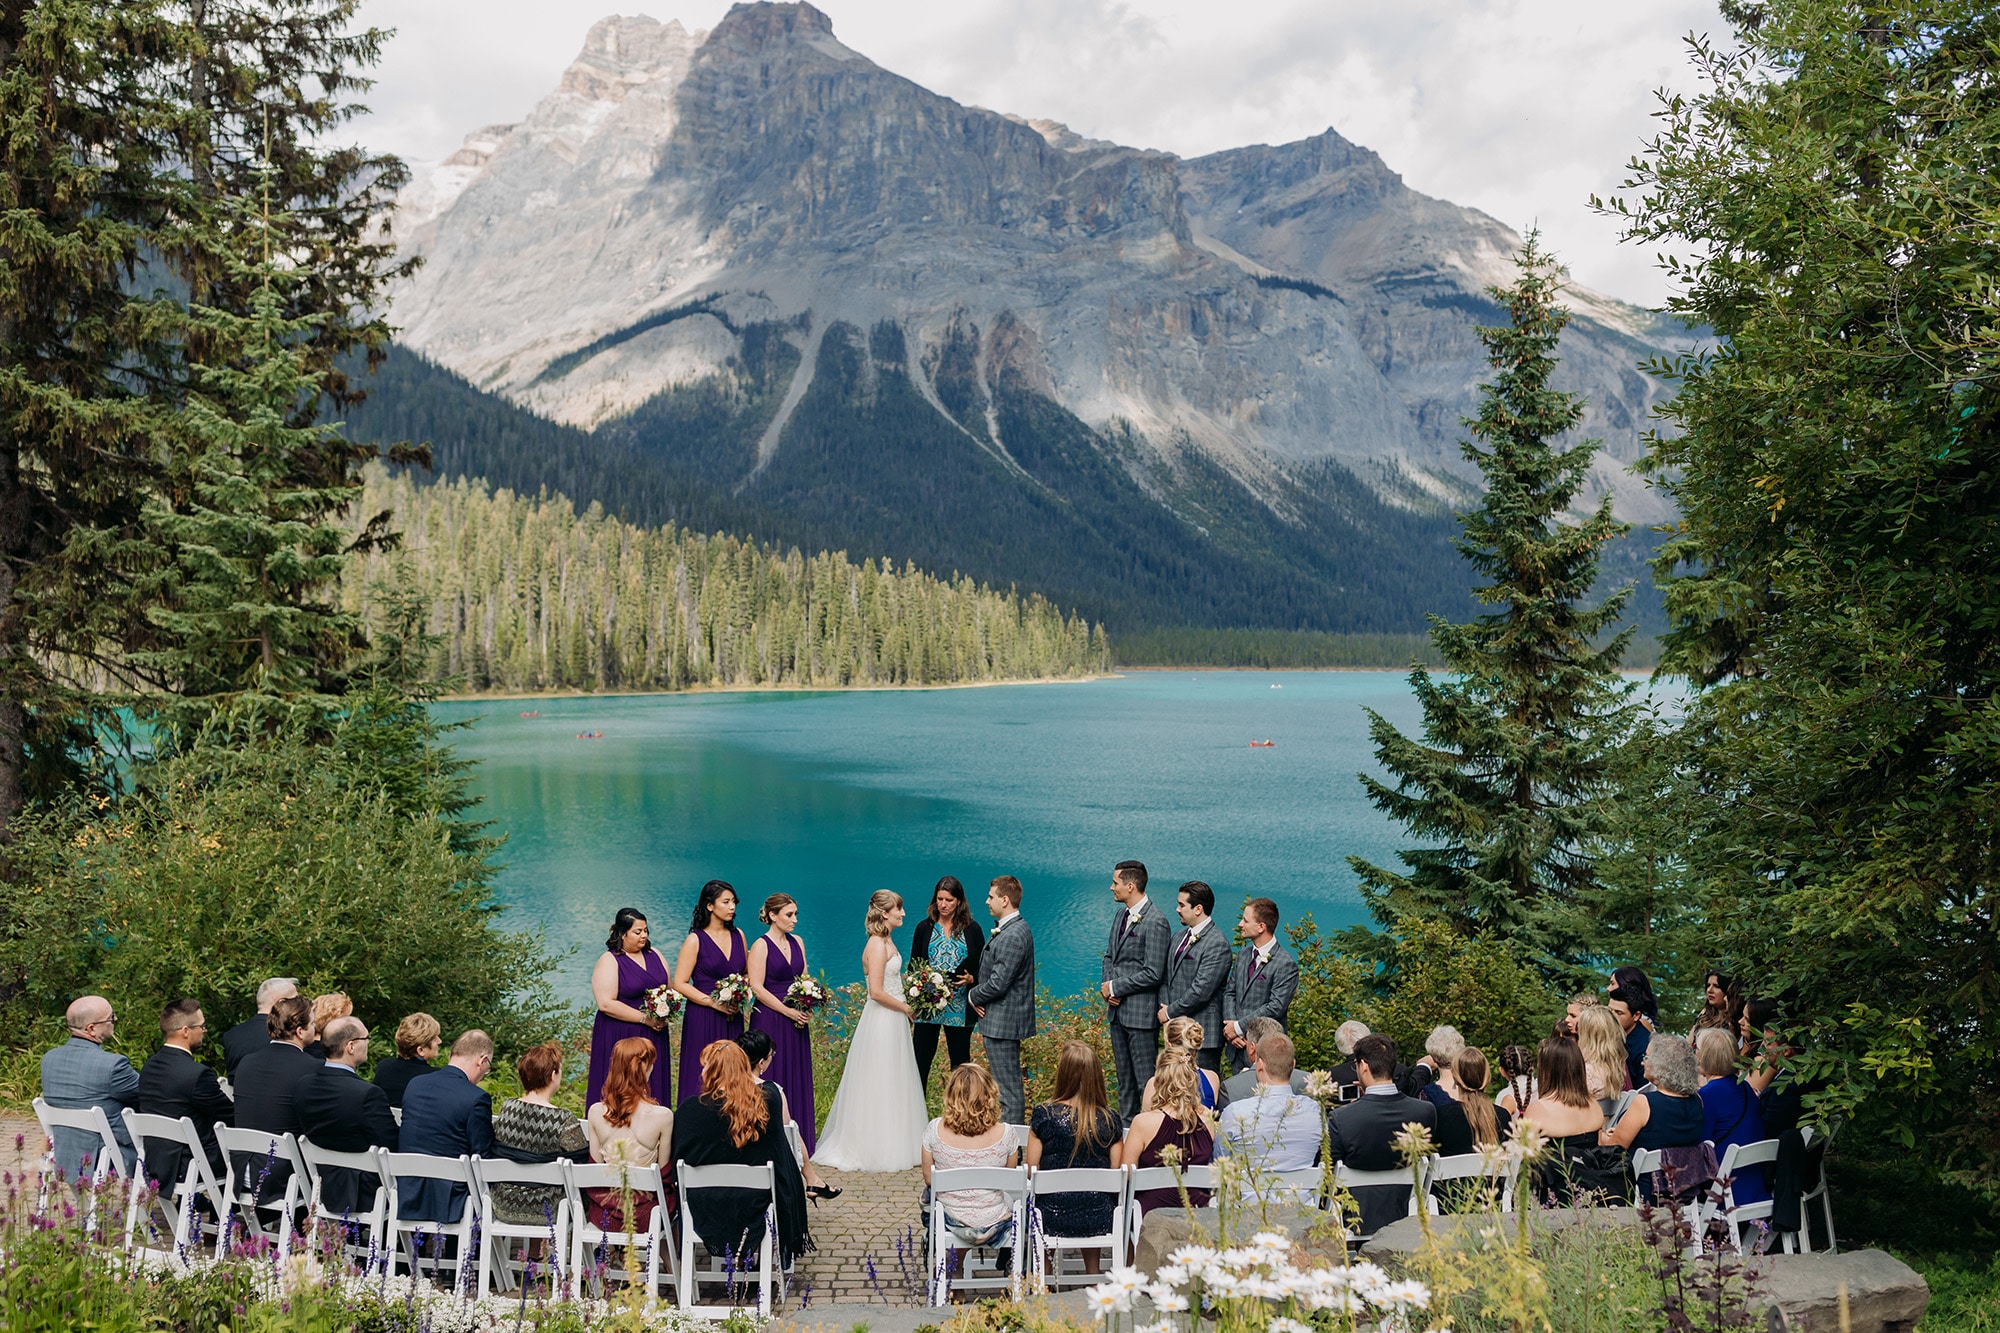 emerald lake autumn wedding outdoor ceremony at viewpoint with mountain views and blue green waters